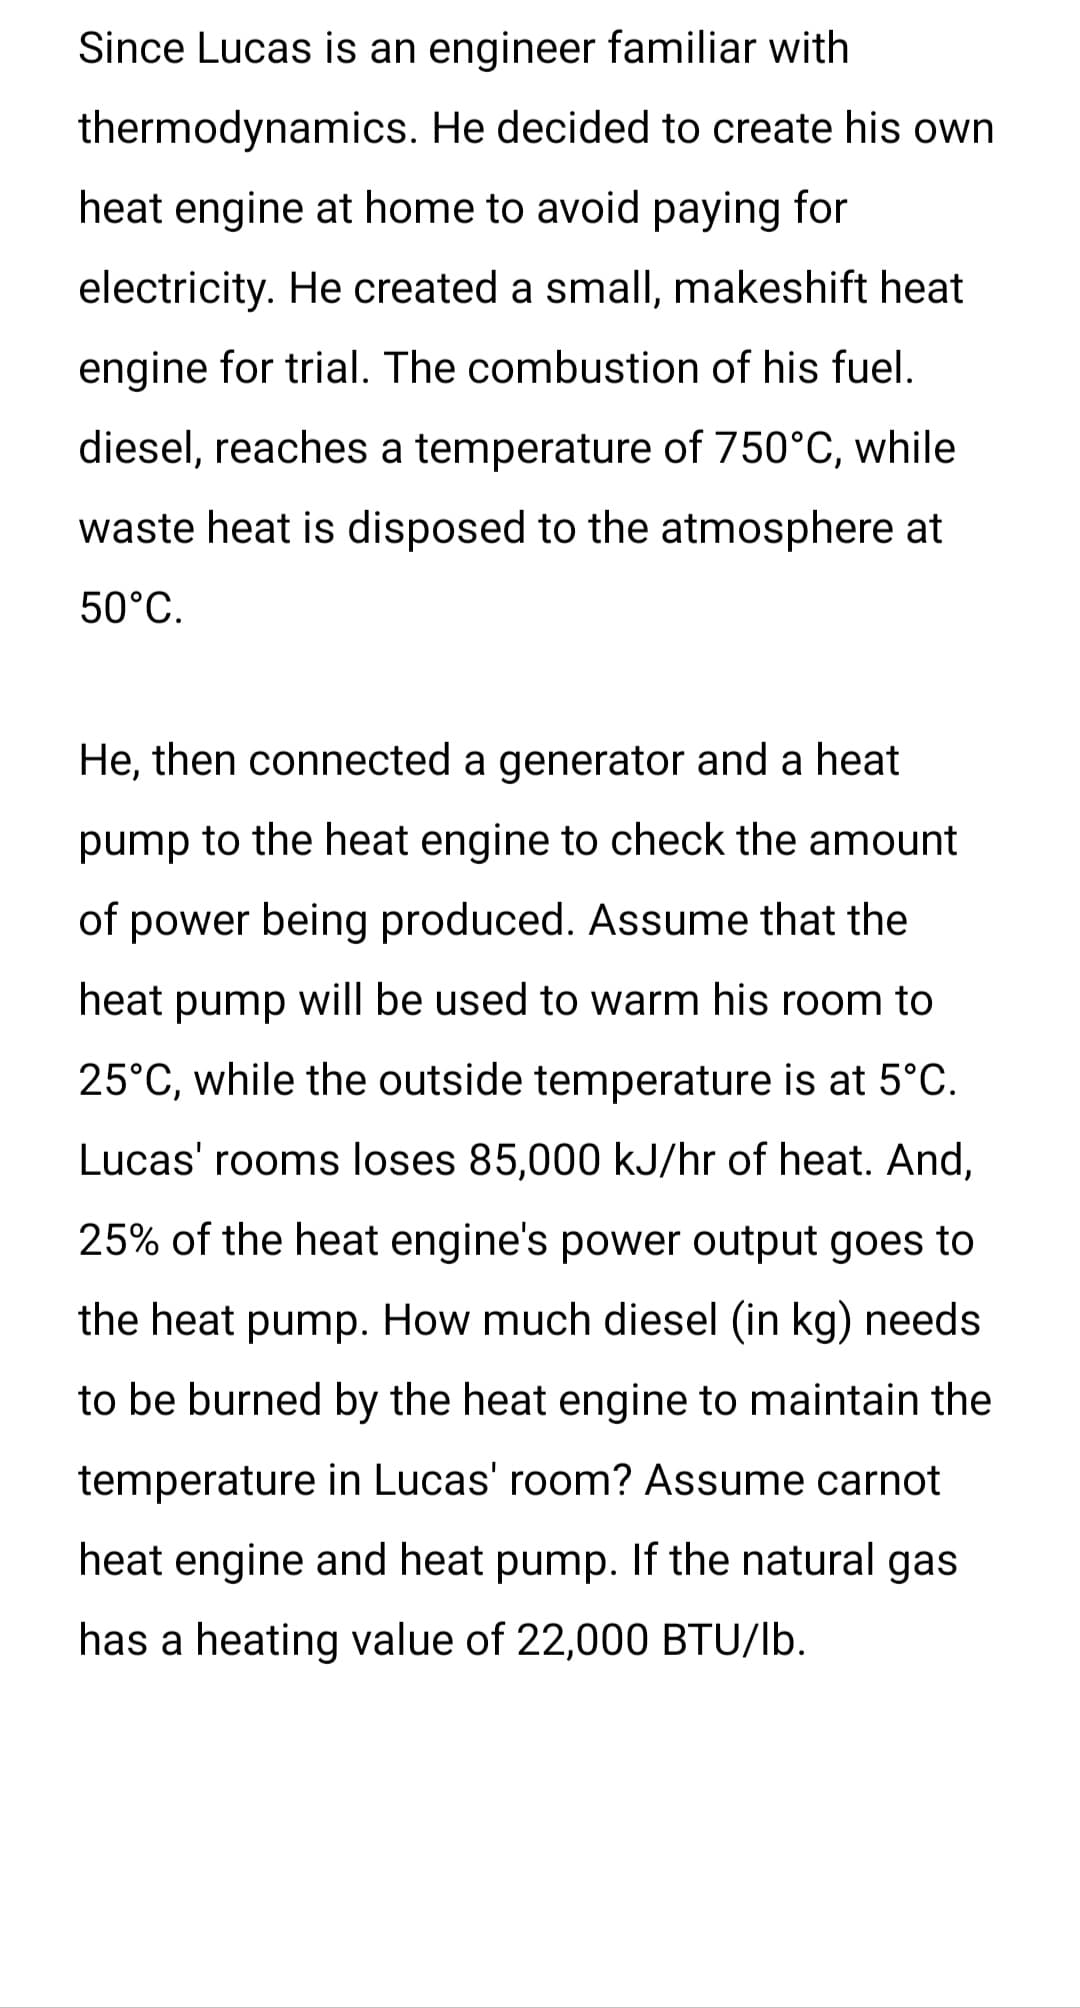 Since Lucas is an engineer familiar with
thermodynamics. He decided to create his own
heat engine at home to avoid paying for
electricity. He created a small, makeshift heat
engine for trial. The combustion of his fuel.
diesel, reaches a temperature of 750°C, while
waste heat is disposed to the atmosphere at
50°C.
He, then connected a generator and a heat
pump to the heat engine to check the amount
of power being produced. Assume that the
heat pump will be used to warm his room to
25°C, while the outside temperature is at 5°C.
Lucas' rooms loses 85,000 kJ/hr of heat. And,
25% of the heat engine's power output goes to
the heat pump. How much diesel (in kg) needs
to be burned by the heat engine to maintain the
temperature in Lucas' room? Assume carnot
heat engine and heat pump. If the natural gas
has a heating value of 22,000 BTU/lb.
